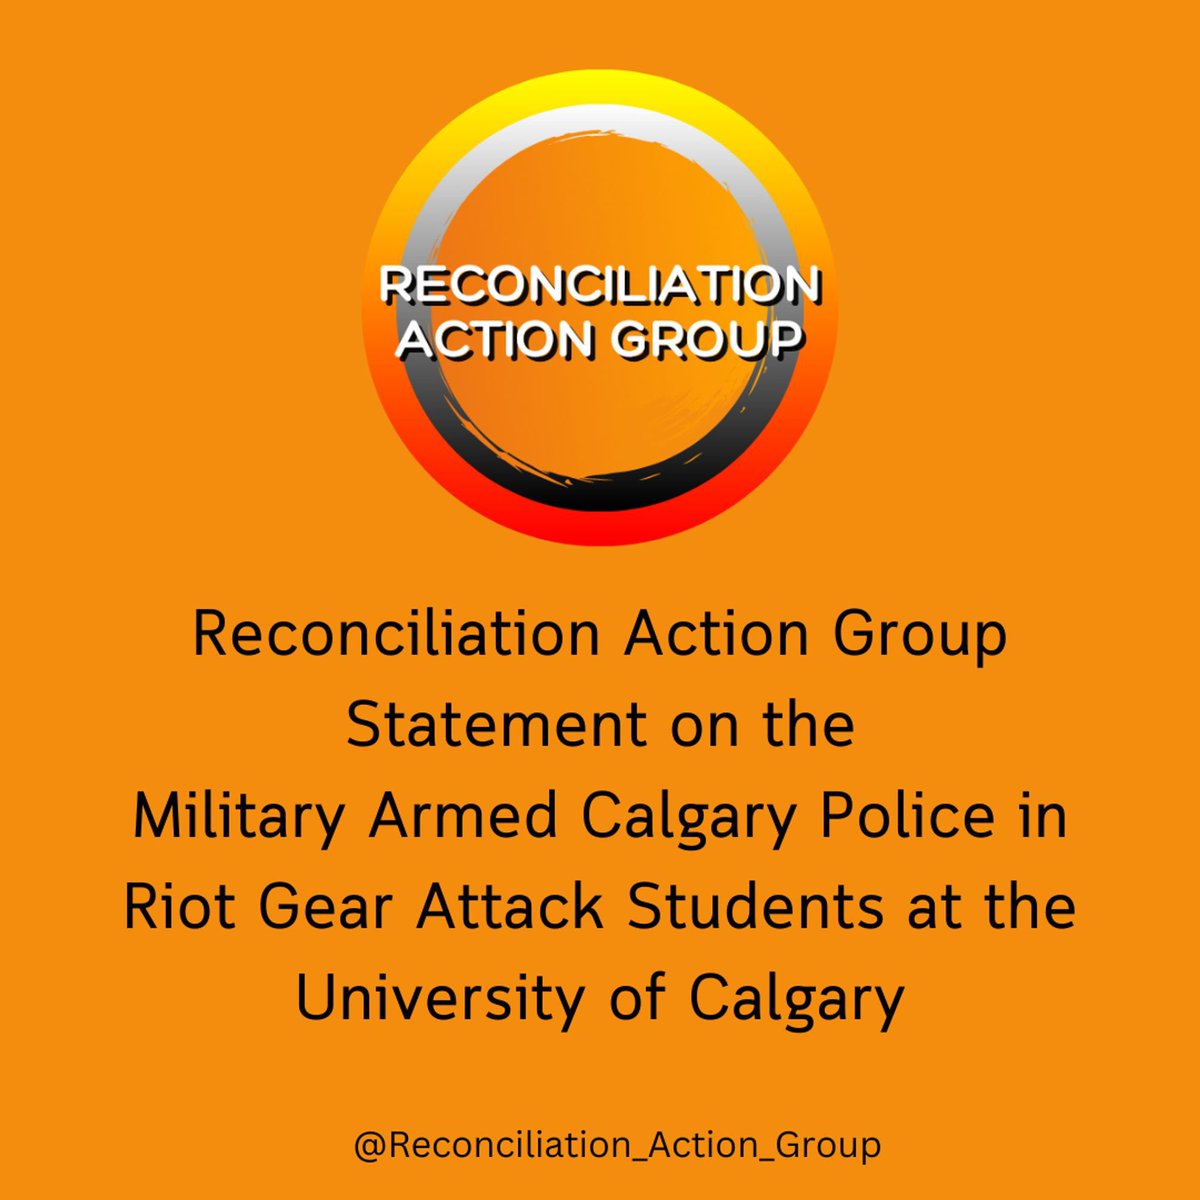 Reconciliation Action Group Statement on the Military Armed Calgary Police in Riot Gear Attack Students at the University of Calgary